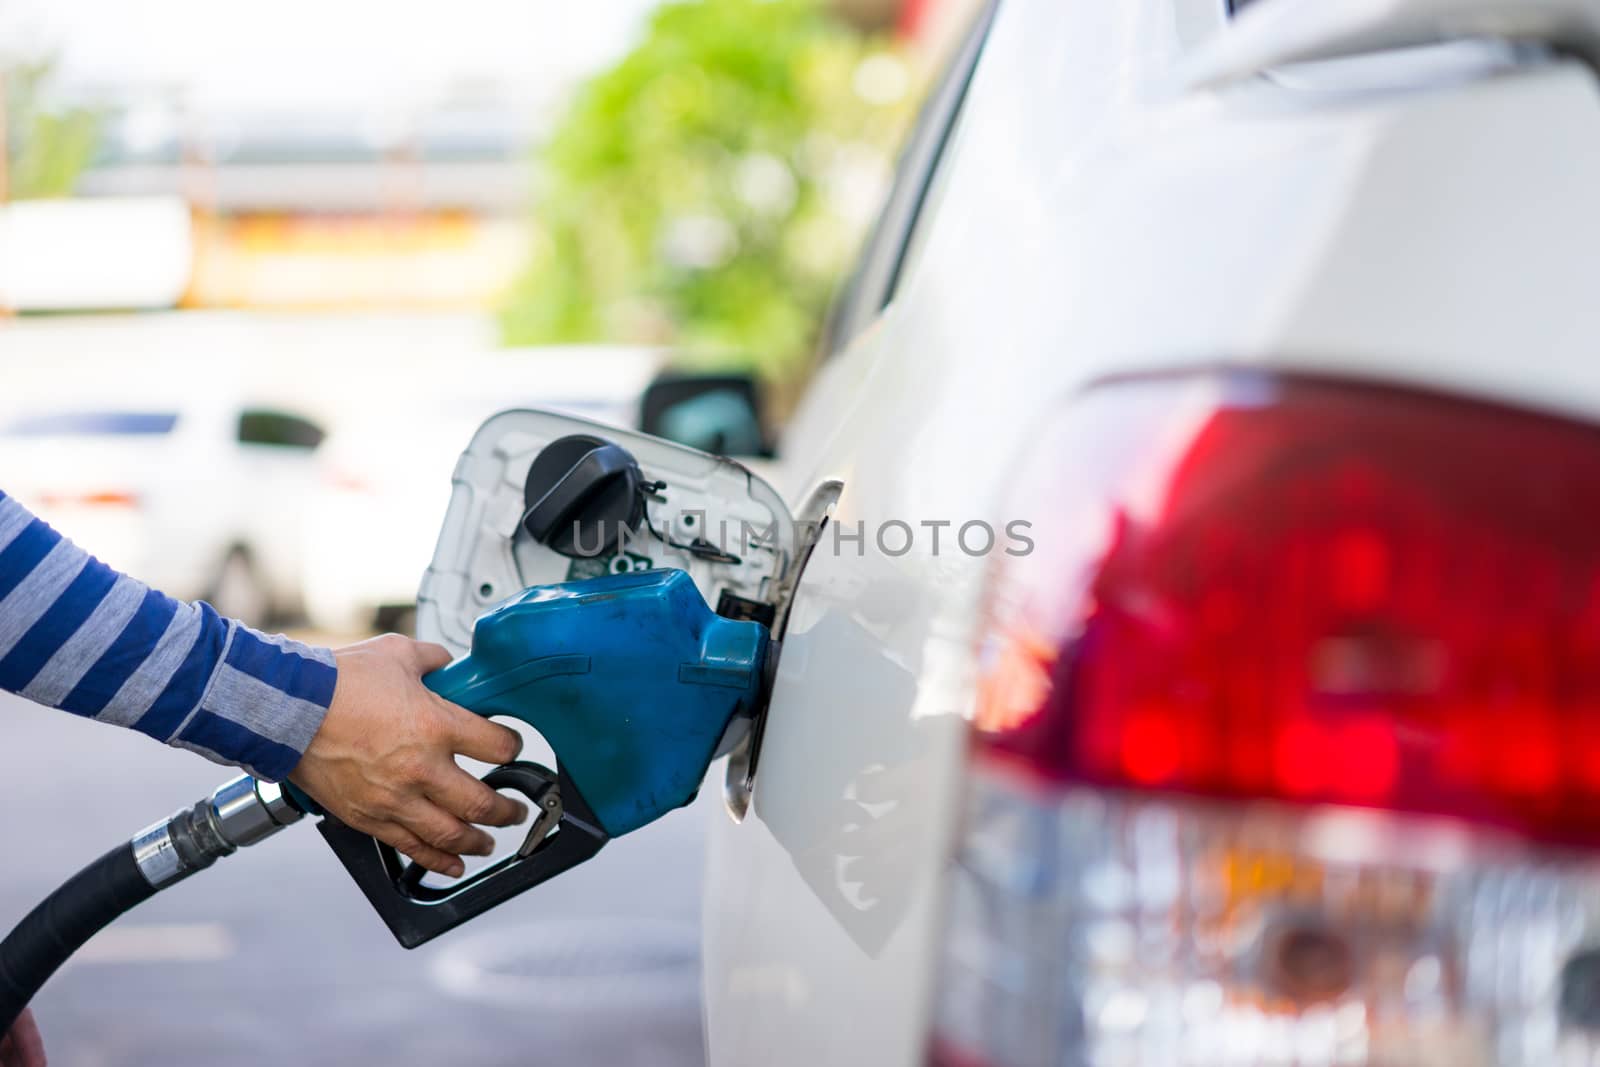 Refill fuel to a car at gas station